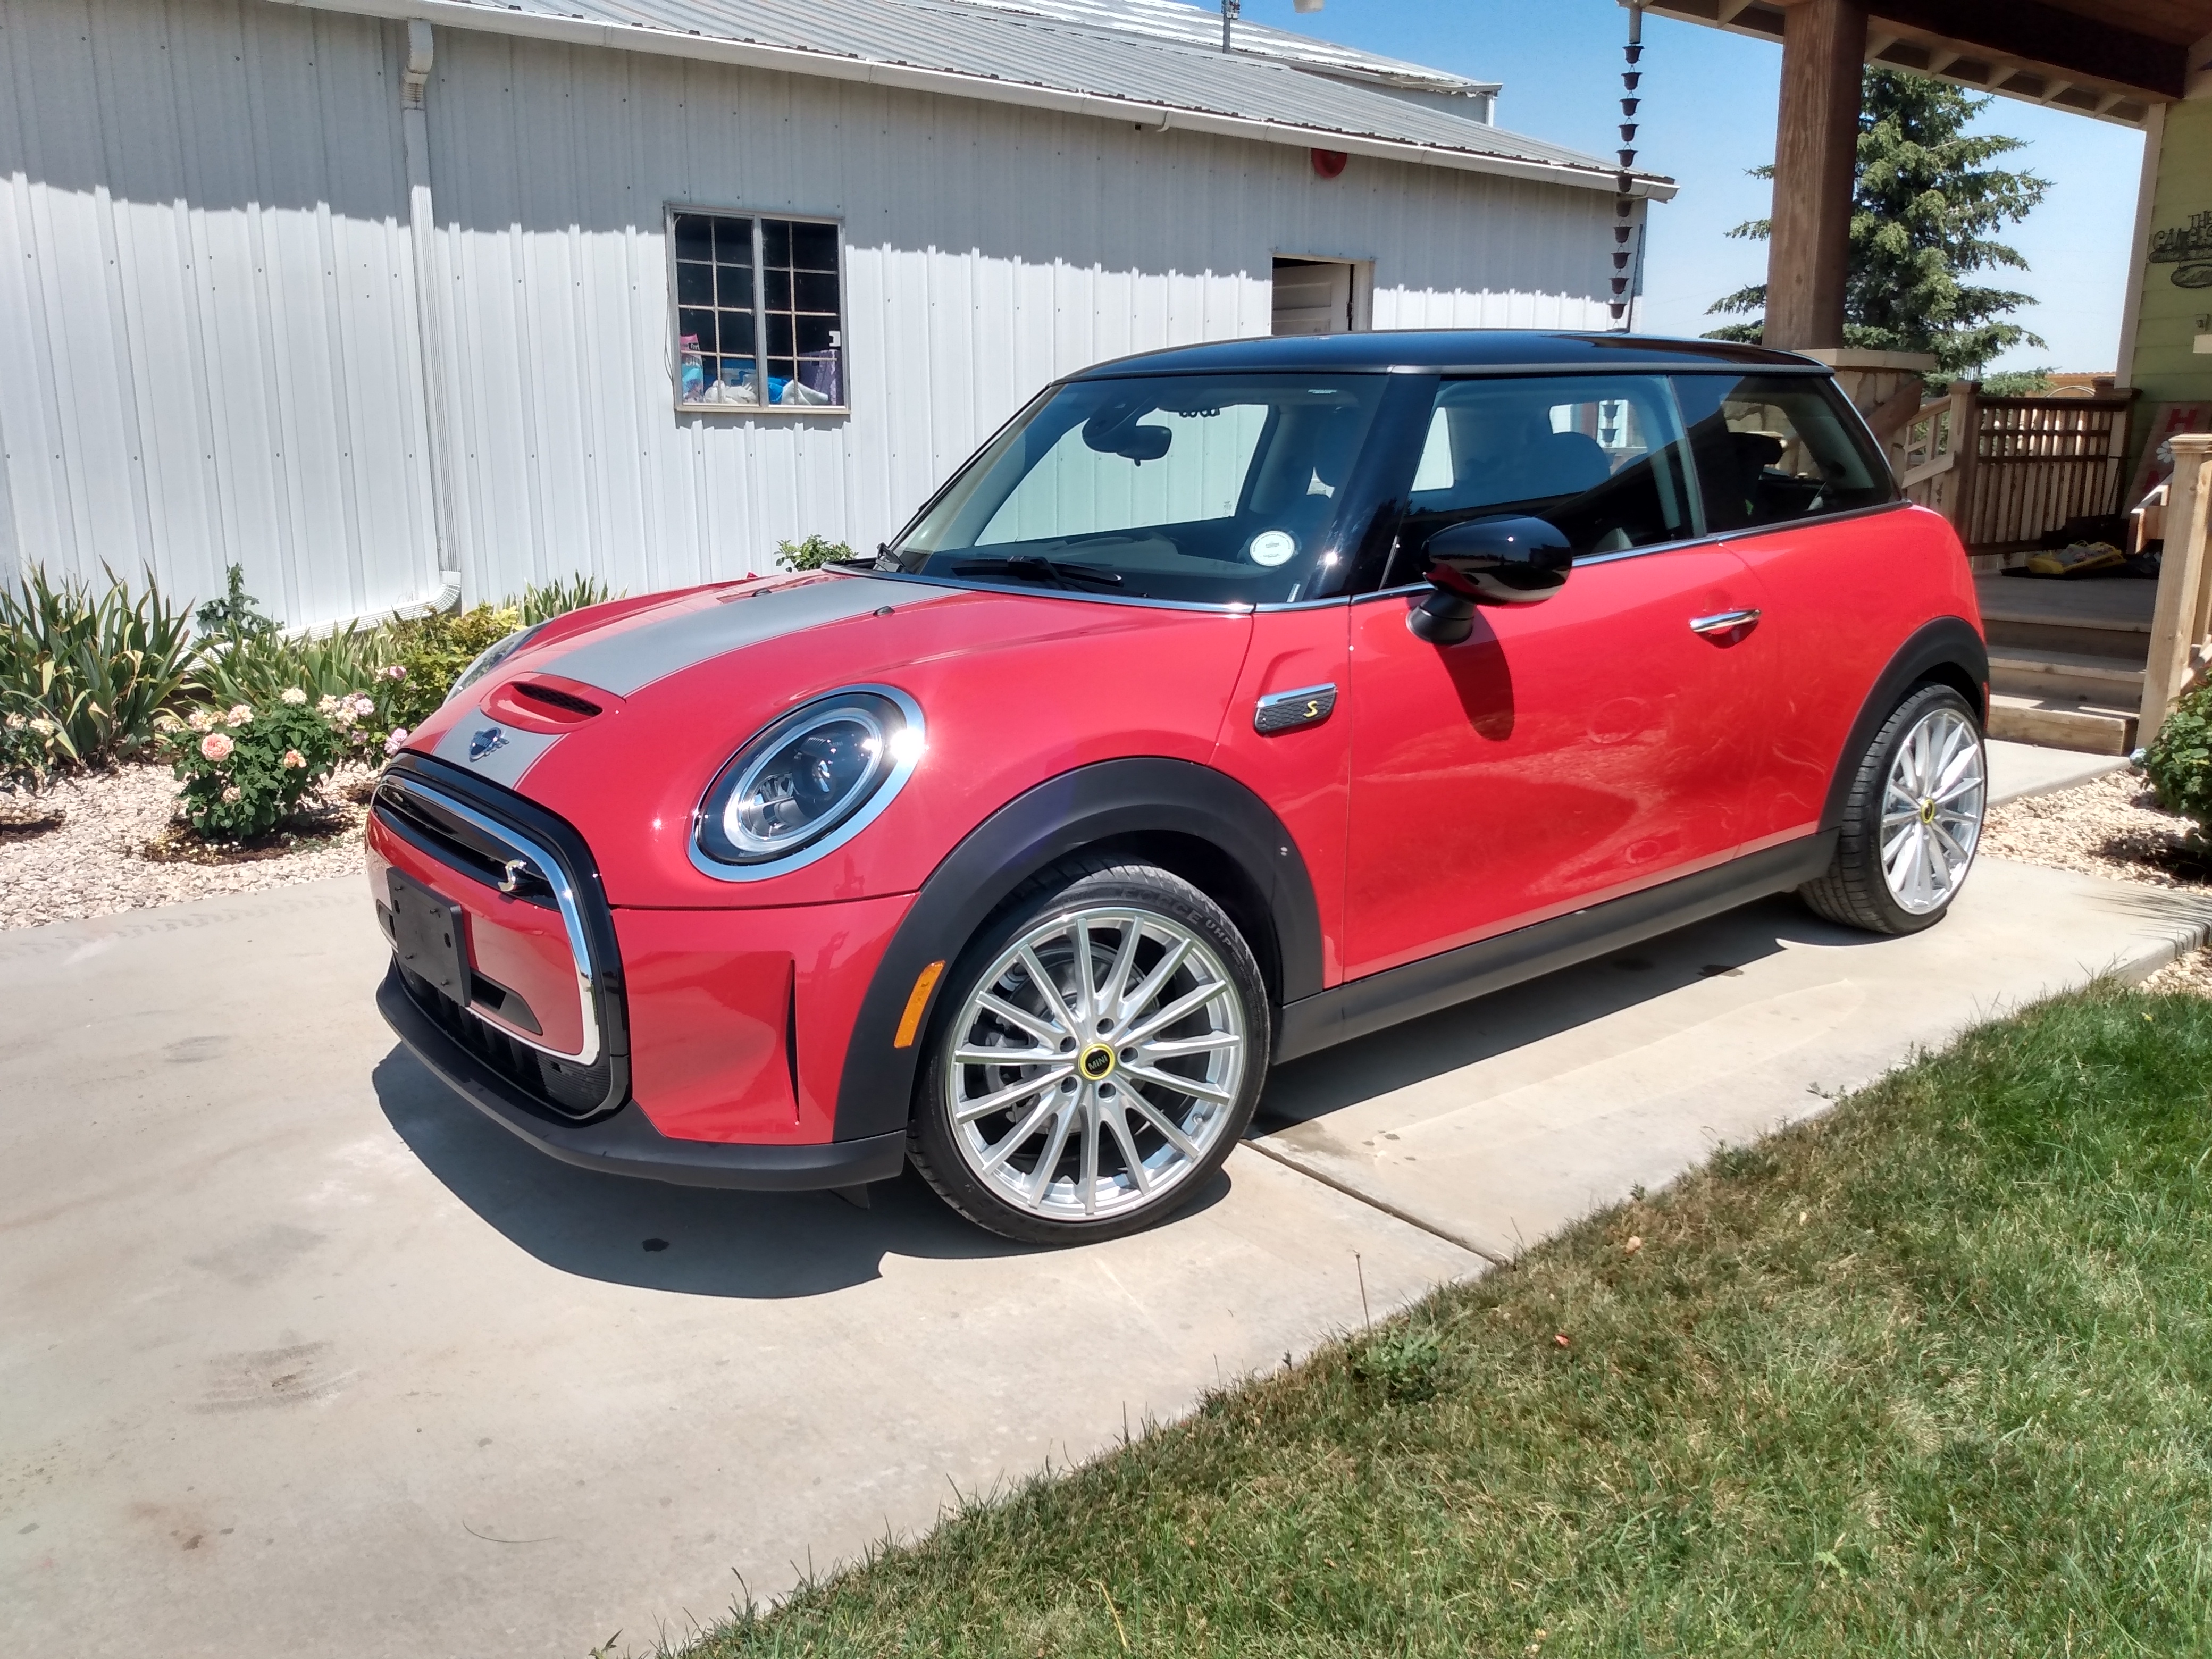 Used MINI Cooper for Sale Near Me in Loveland, CO - Autotrader